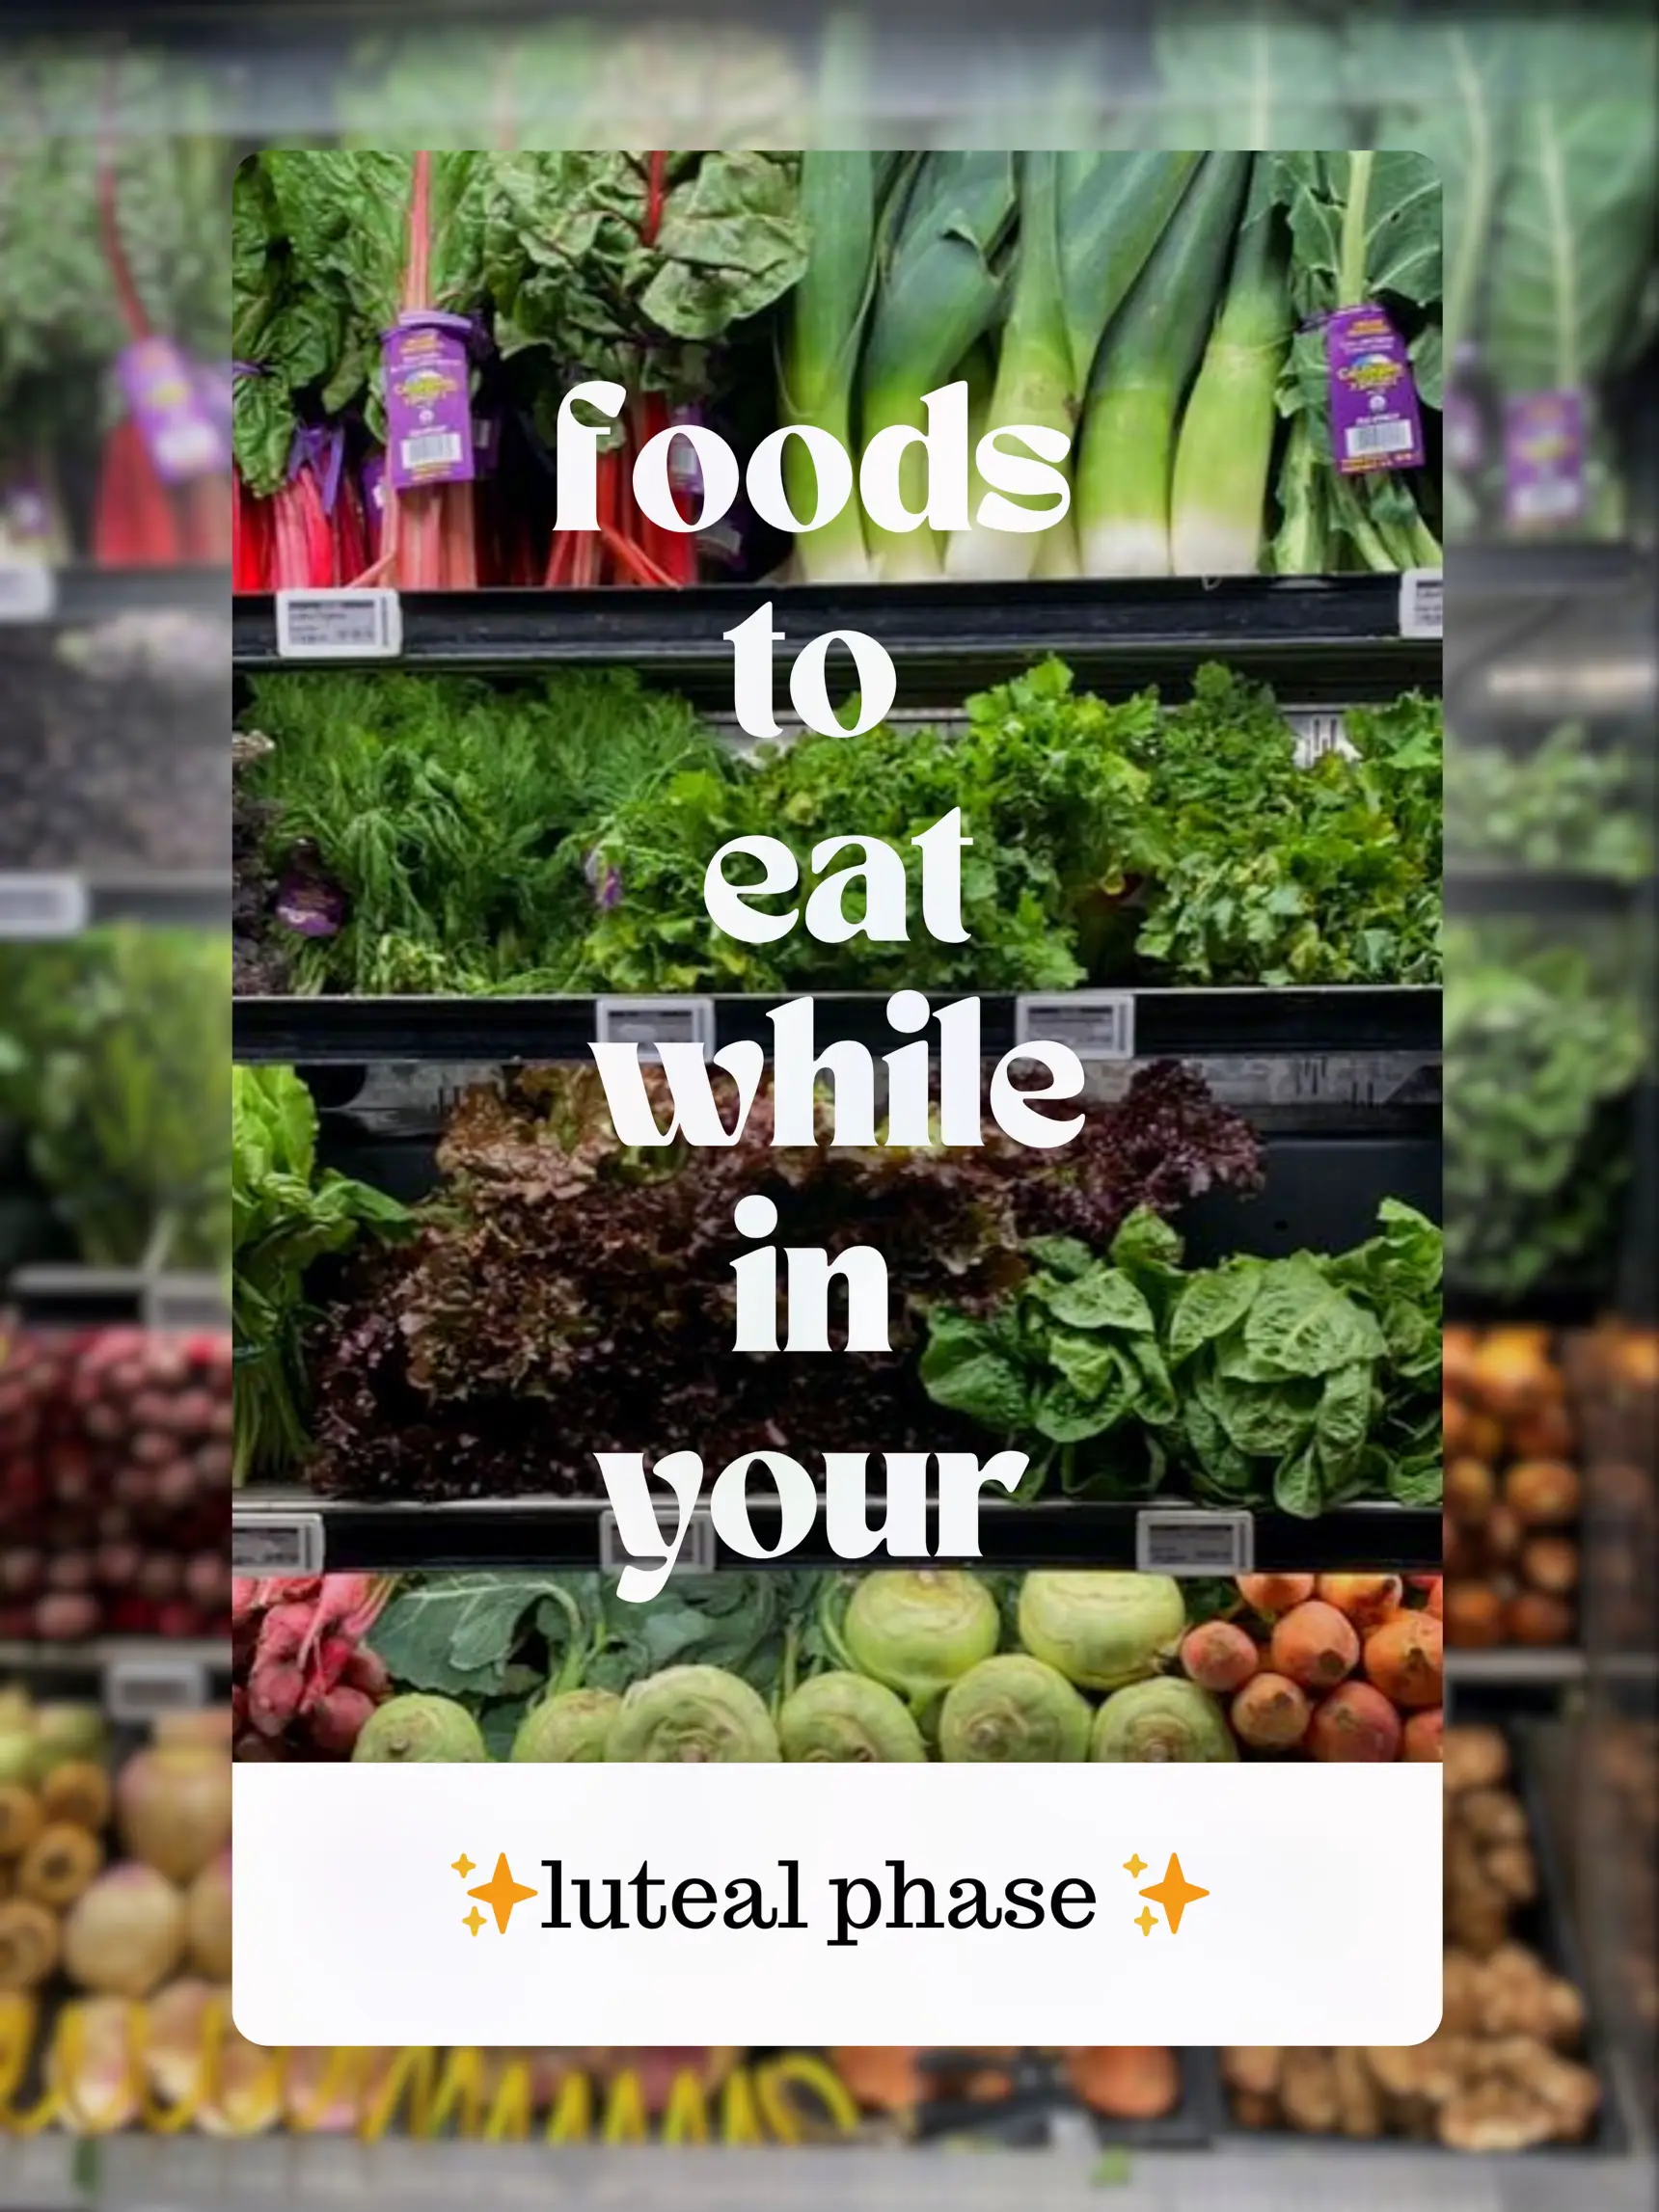 🩸 What to eat in the luteal phase 🩸 In the luteal phase, you may